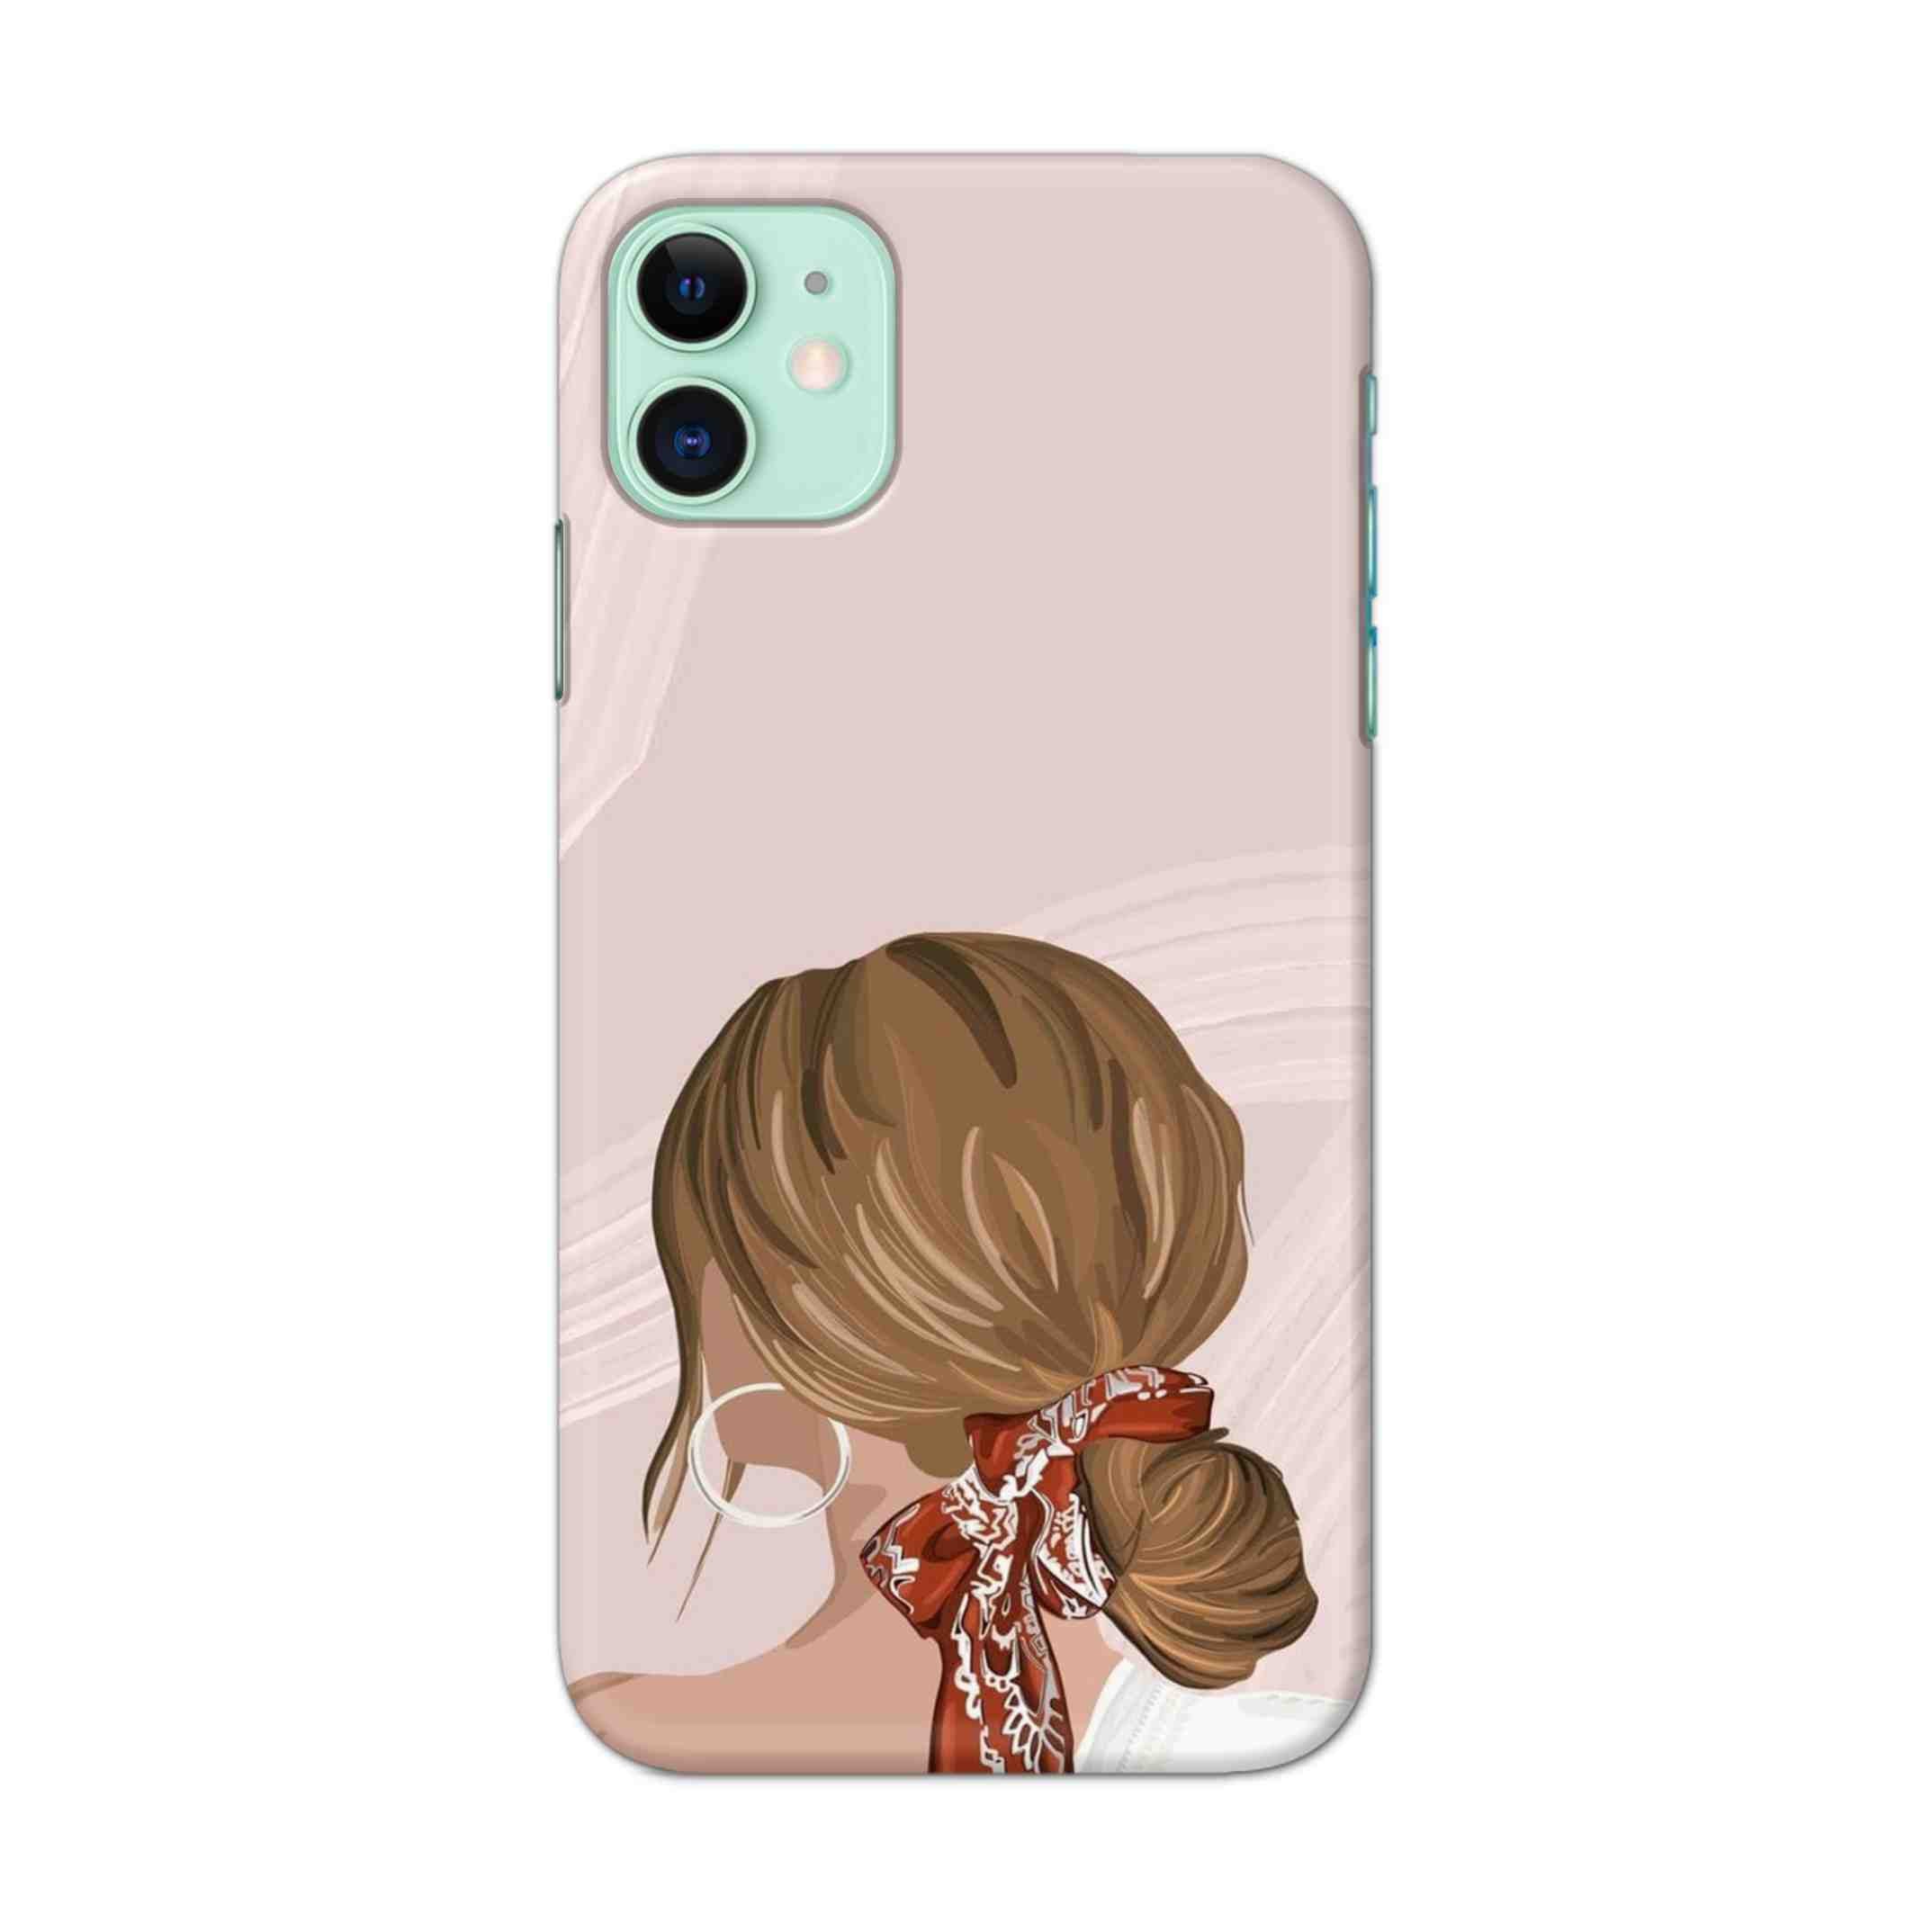 Buy Girl With Red Scaff Hard Back Mobile Phone Case Cover For iPhone 11 Online